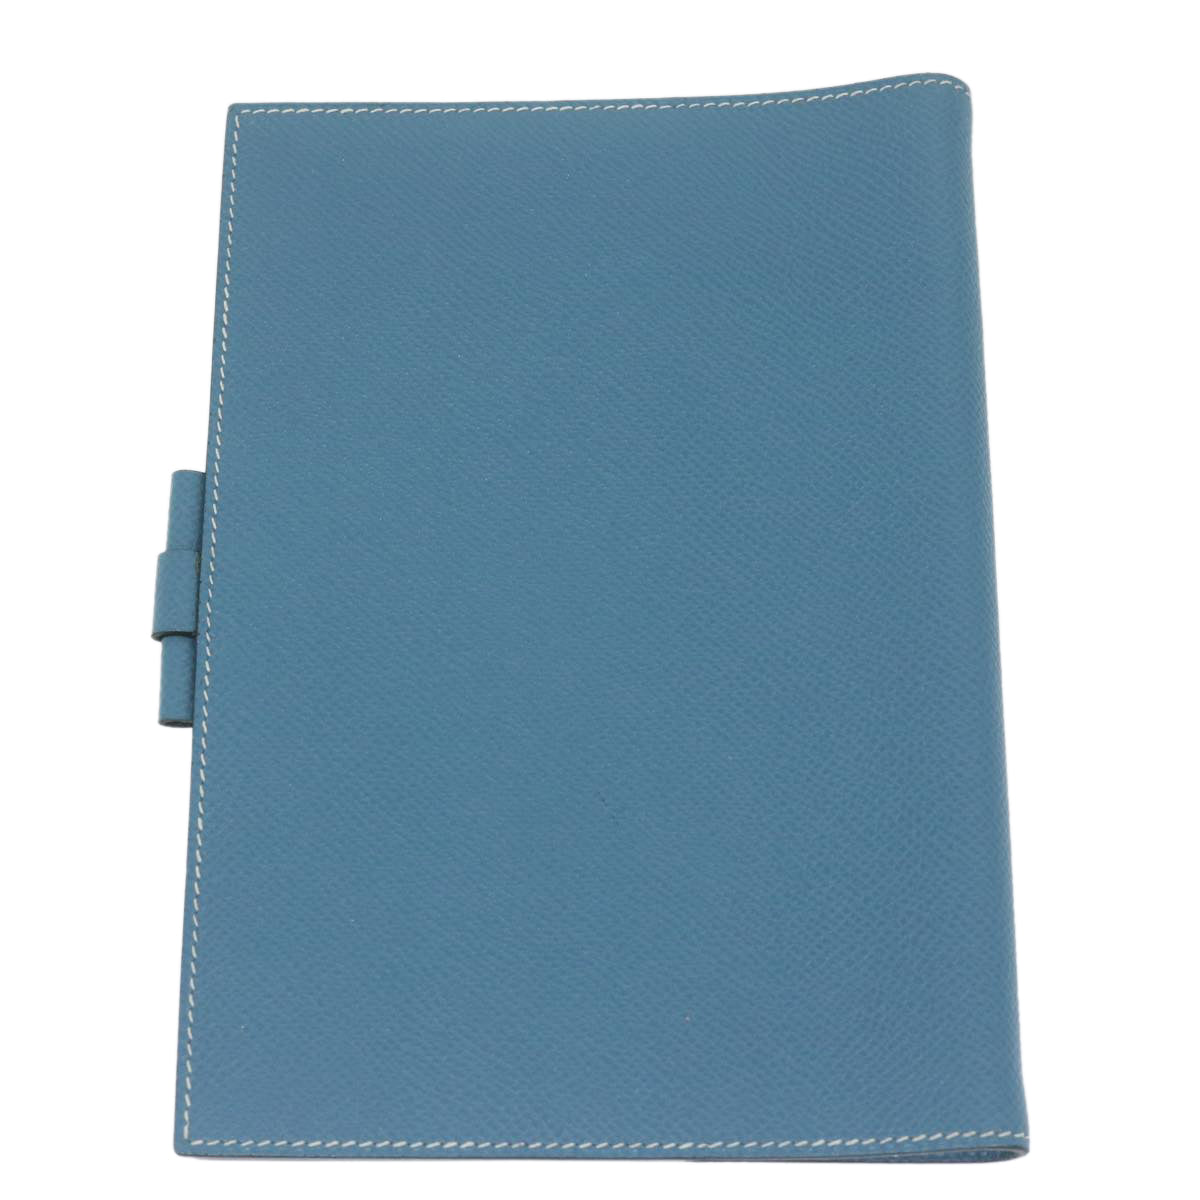 HERMES agenda Day Planner Cover Leather Blue Auth ar11141 - 0